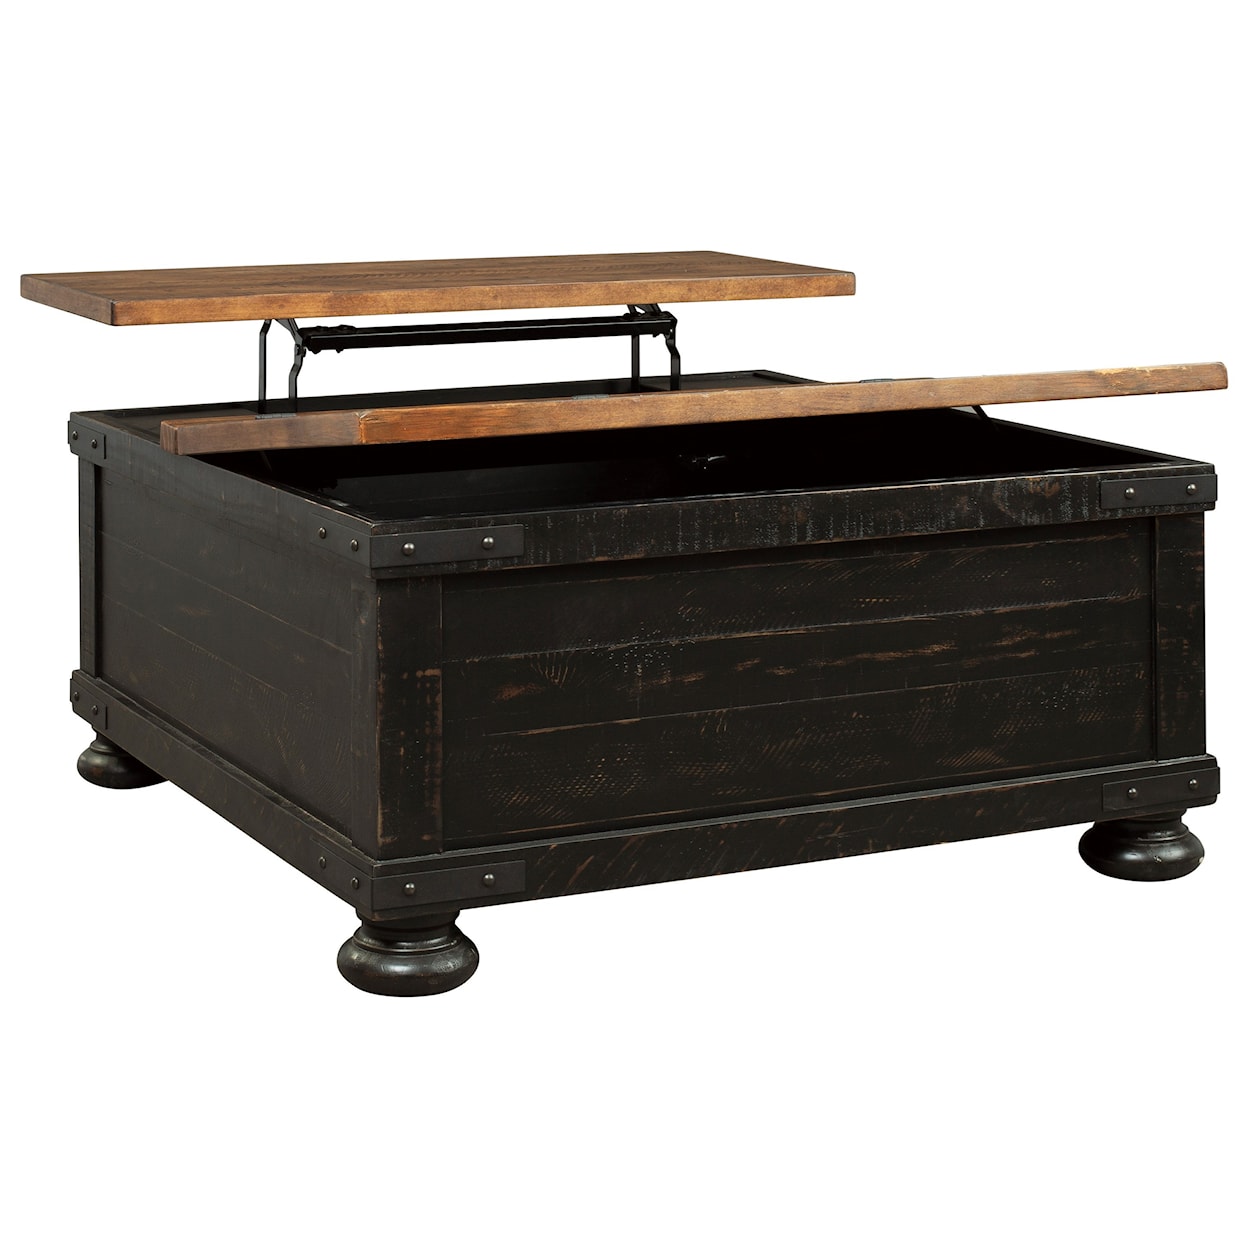 Michael Alan Select Valebeck Square Lift Top Cocktail Table